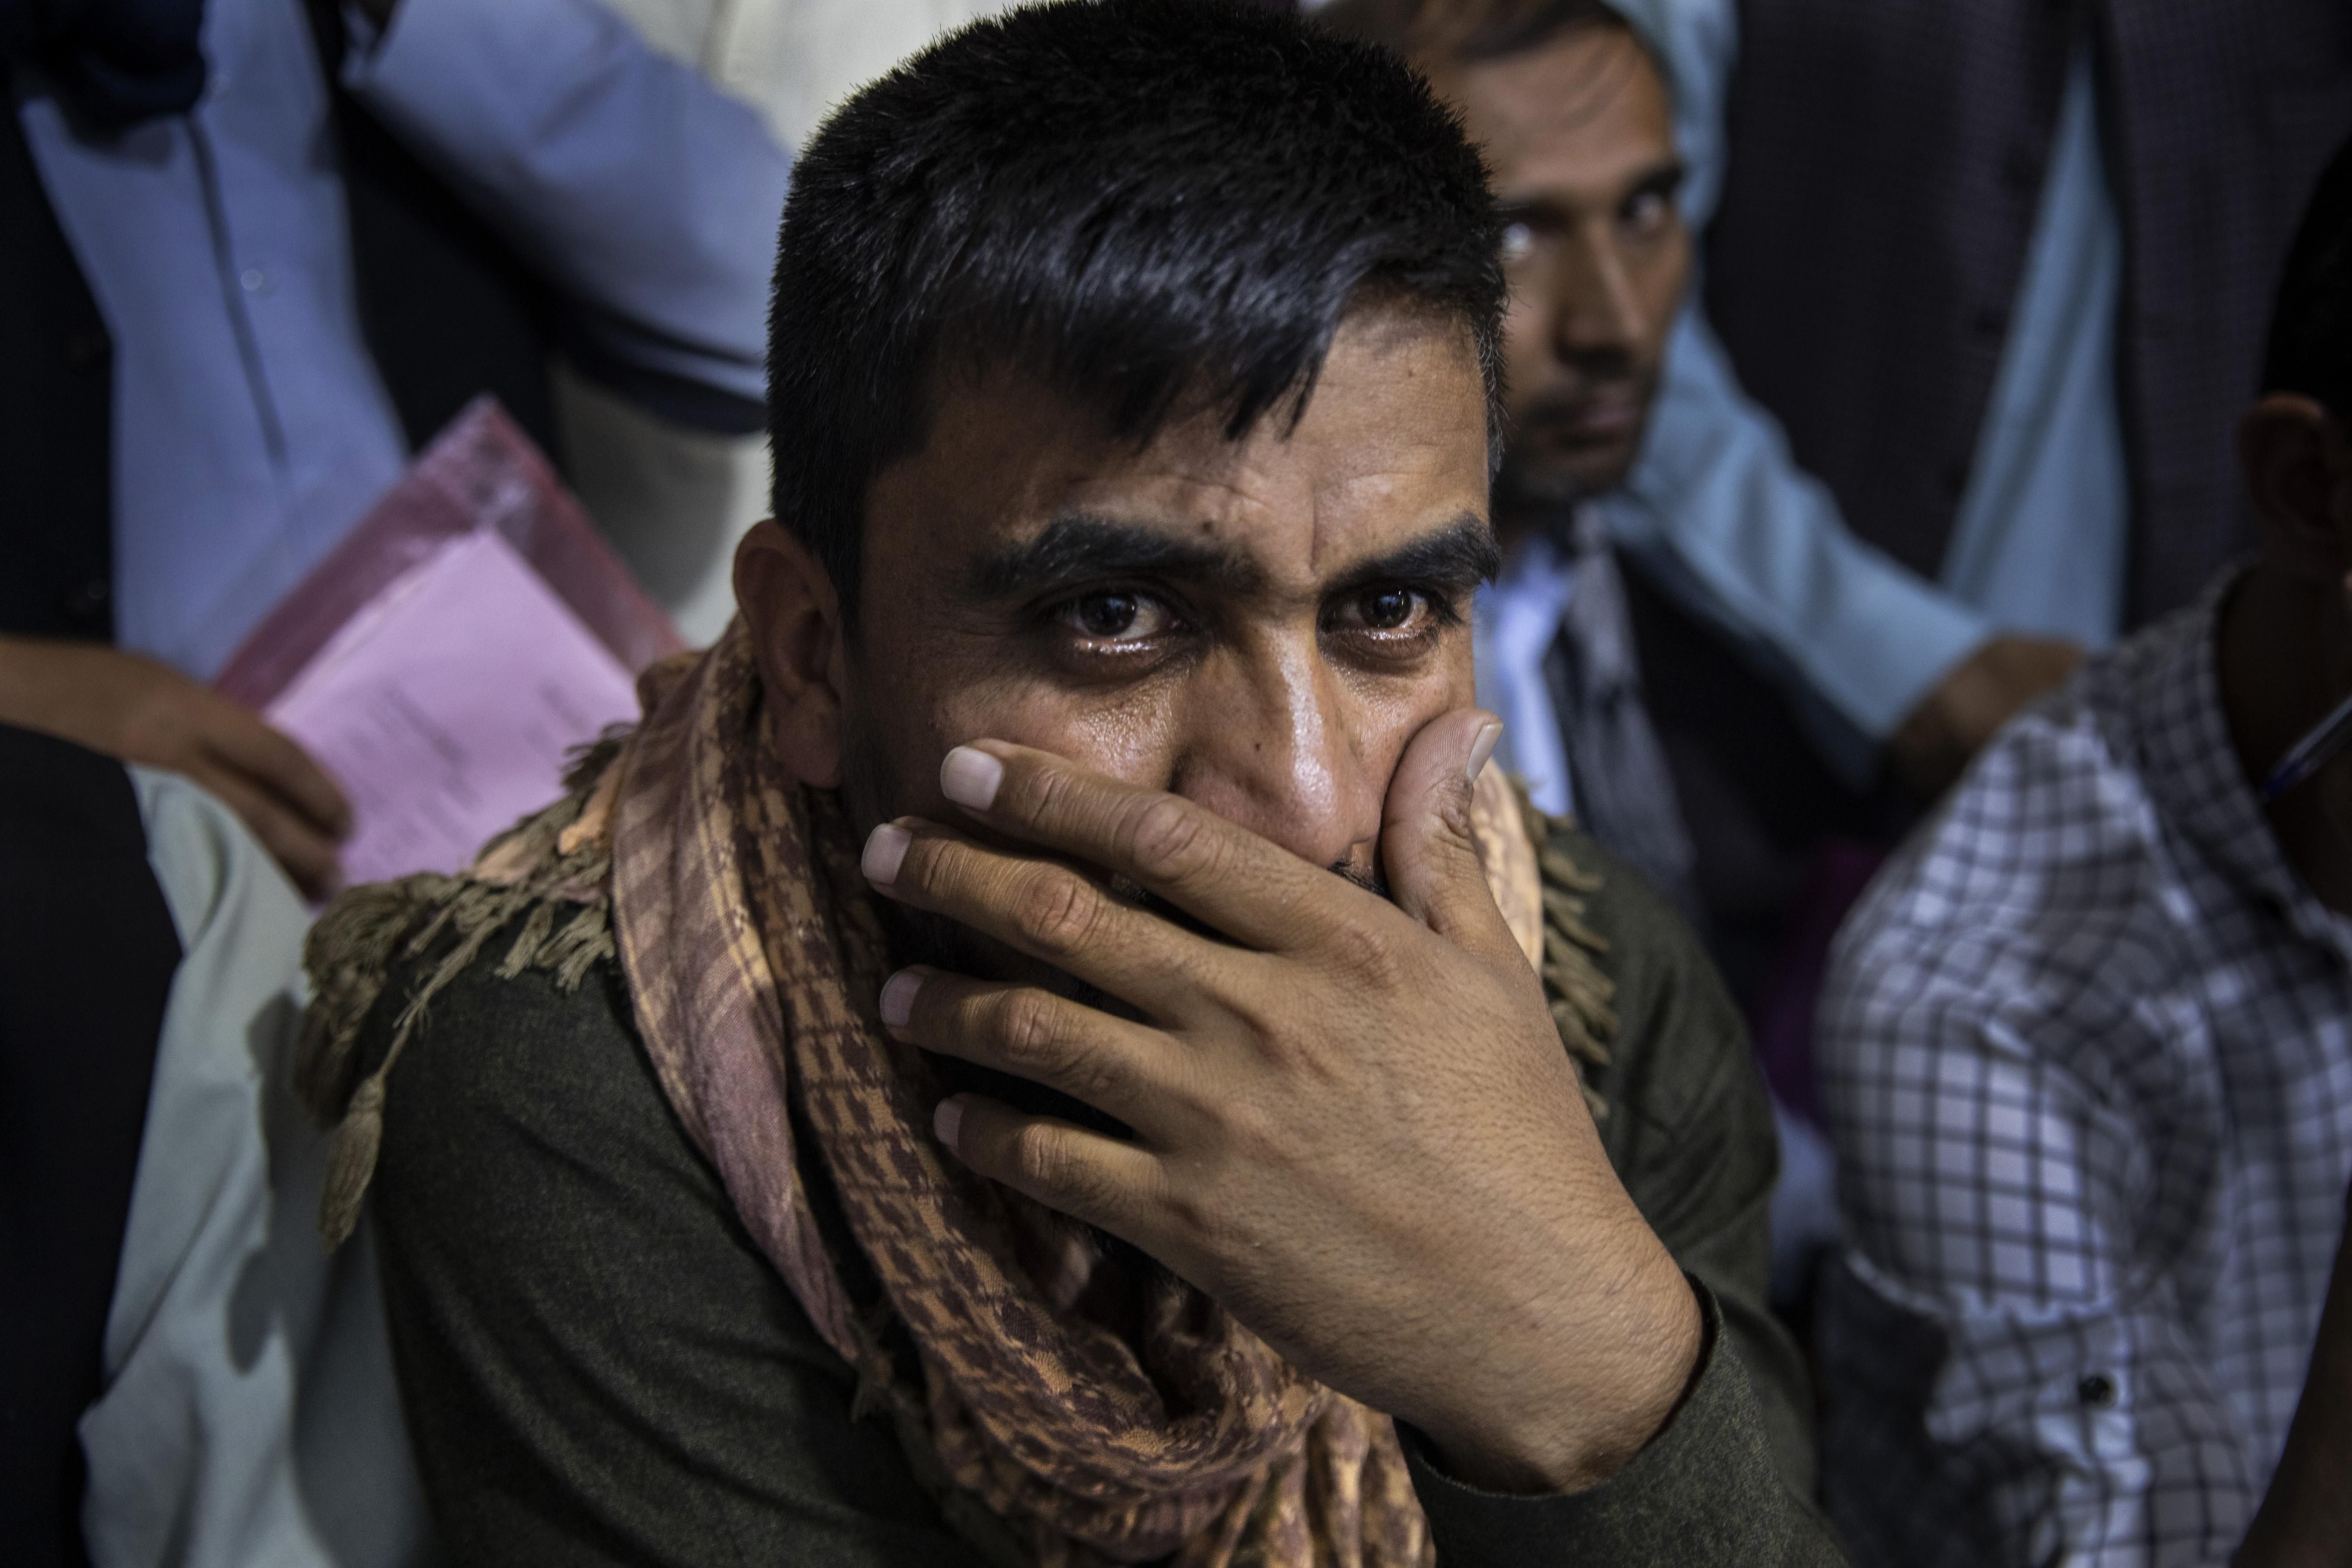 Afghan Special Immigrant Visa applicants crowd into the Herat Kabul Internet cafe